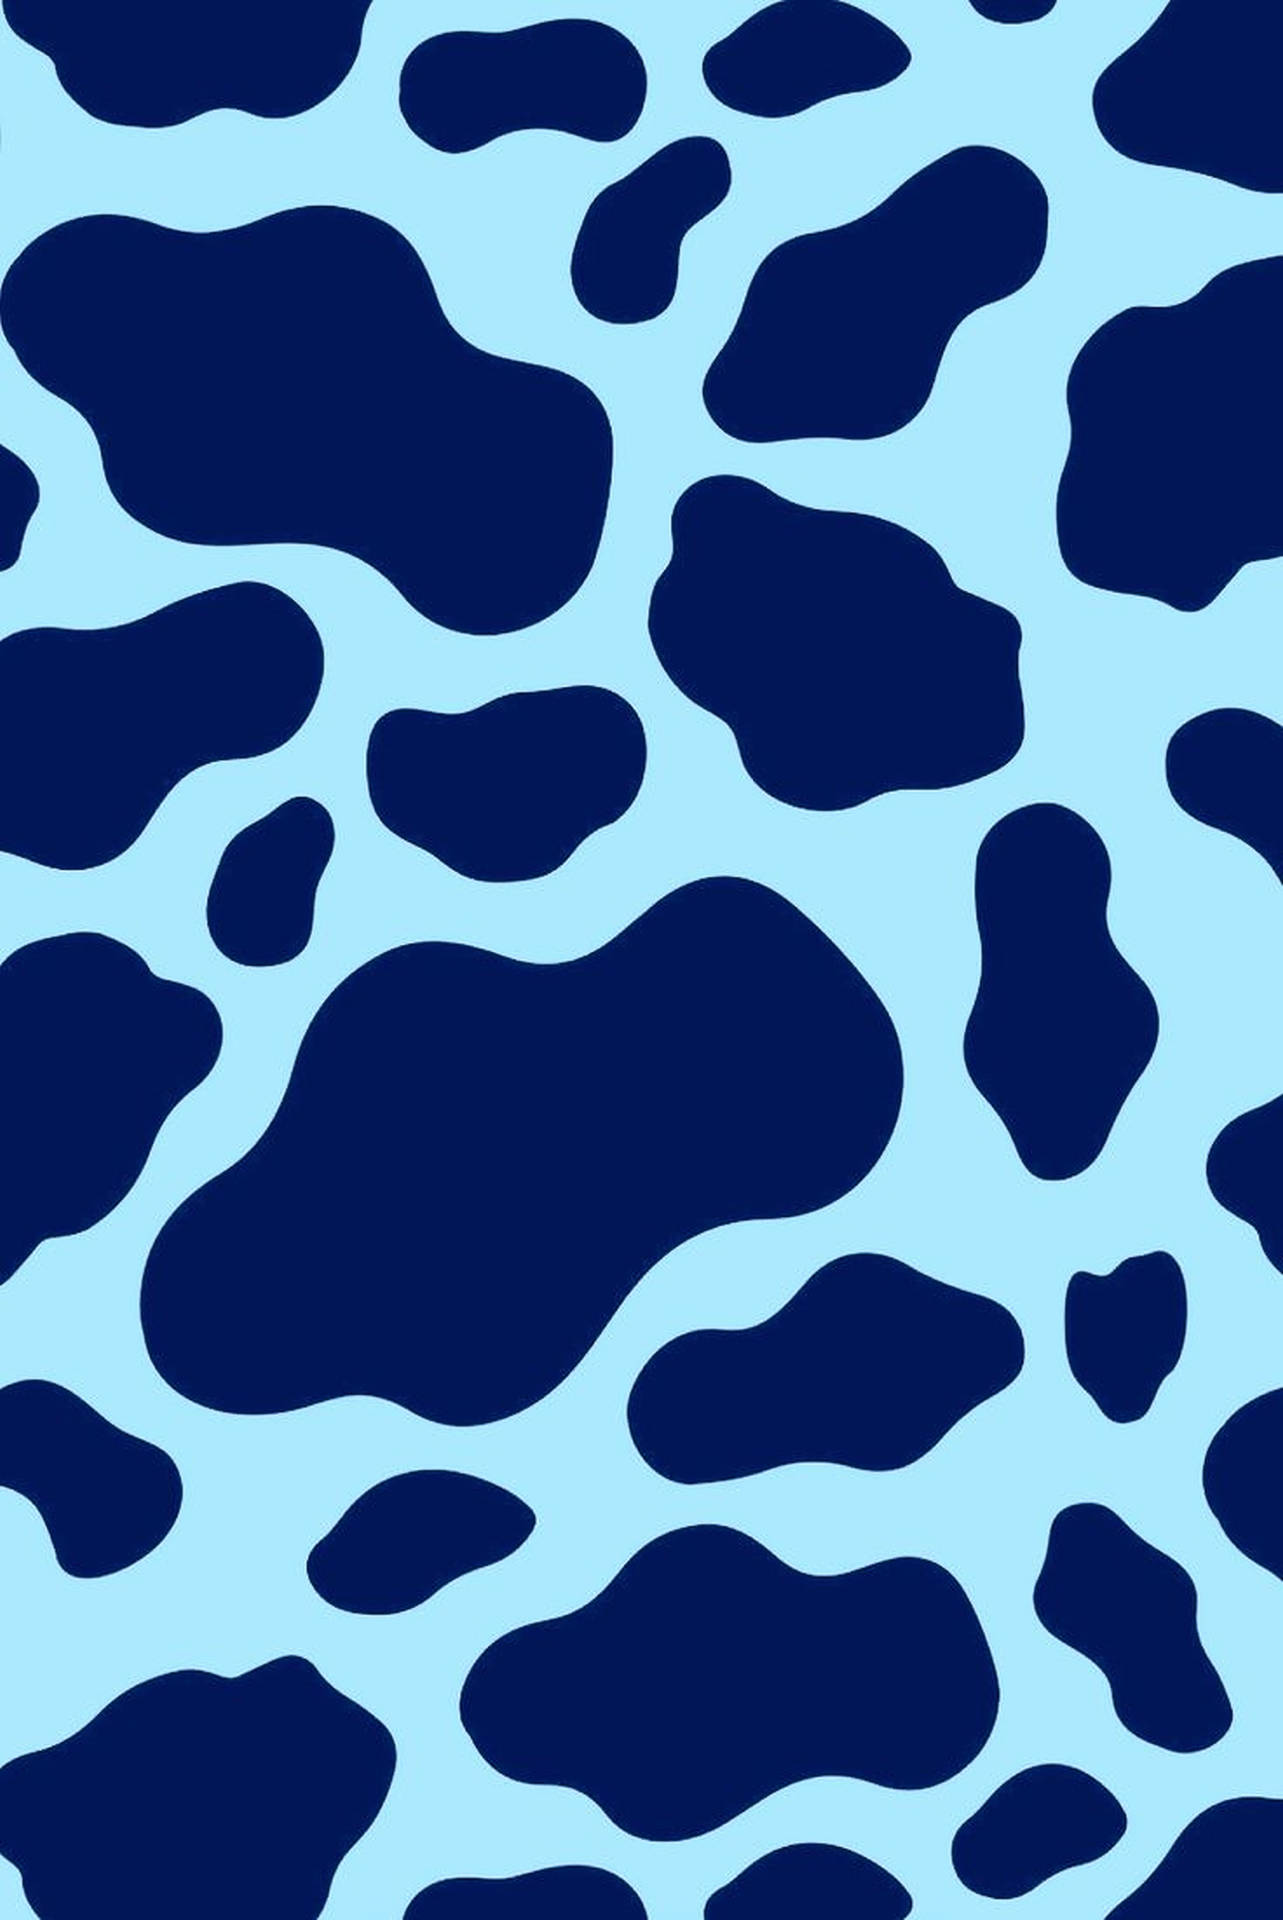 Unconventional Artistry: Blue Shade Cow Print Wallpaper